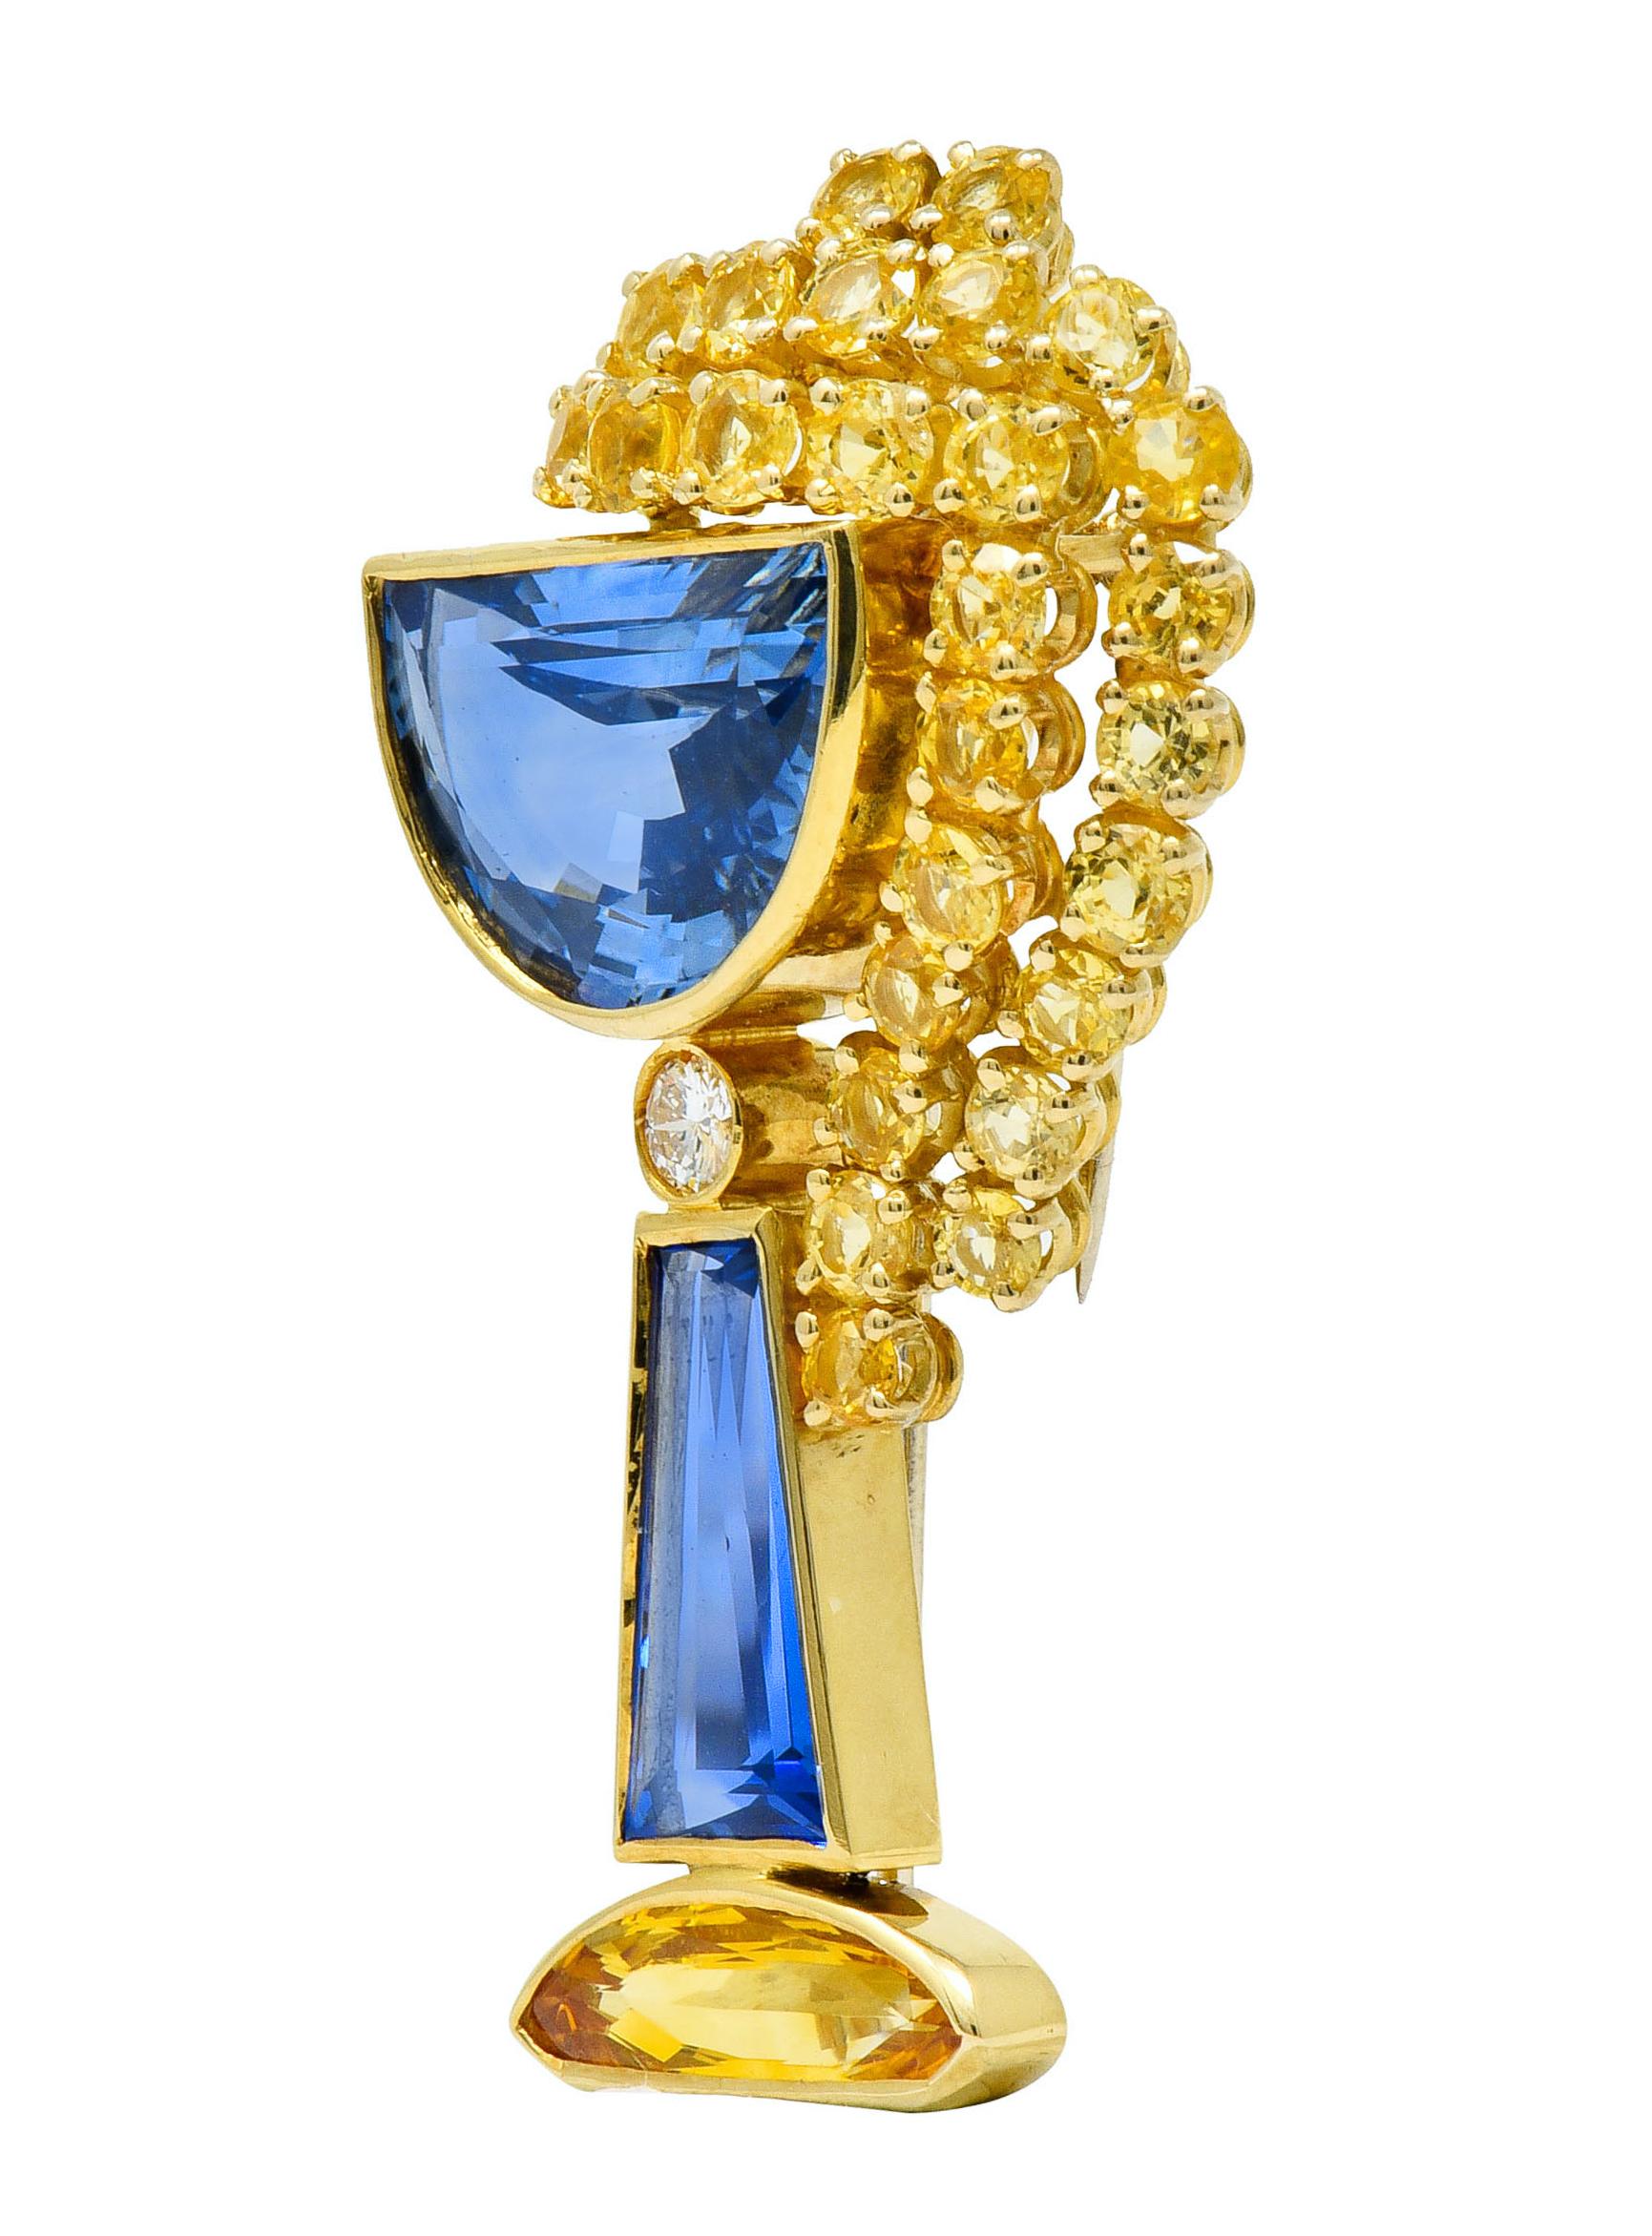 Brooch is comprised of three bezel set and fancily cut sapphire as a stylized goblet form, weighing in total approximately 13.00 carats

Overflowing with a cascade of round cut sapphire, each individually set in its own basket, weighing